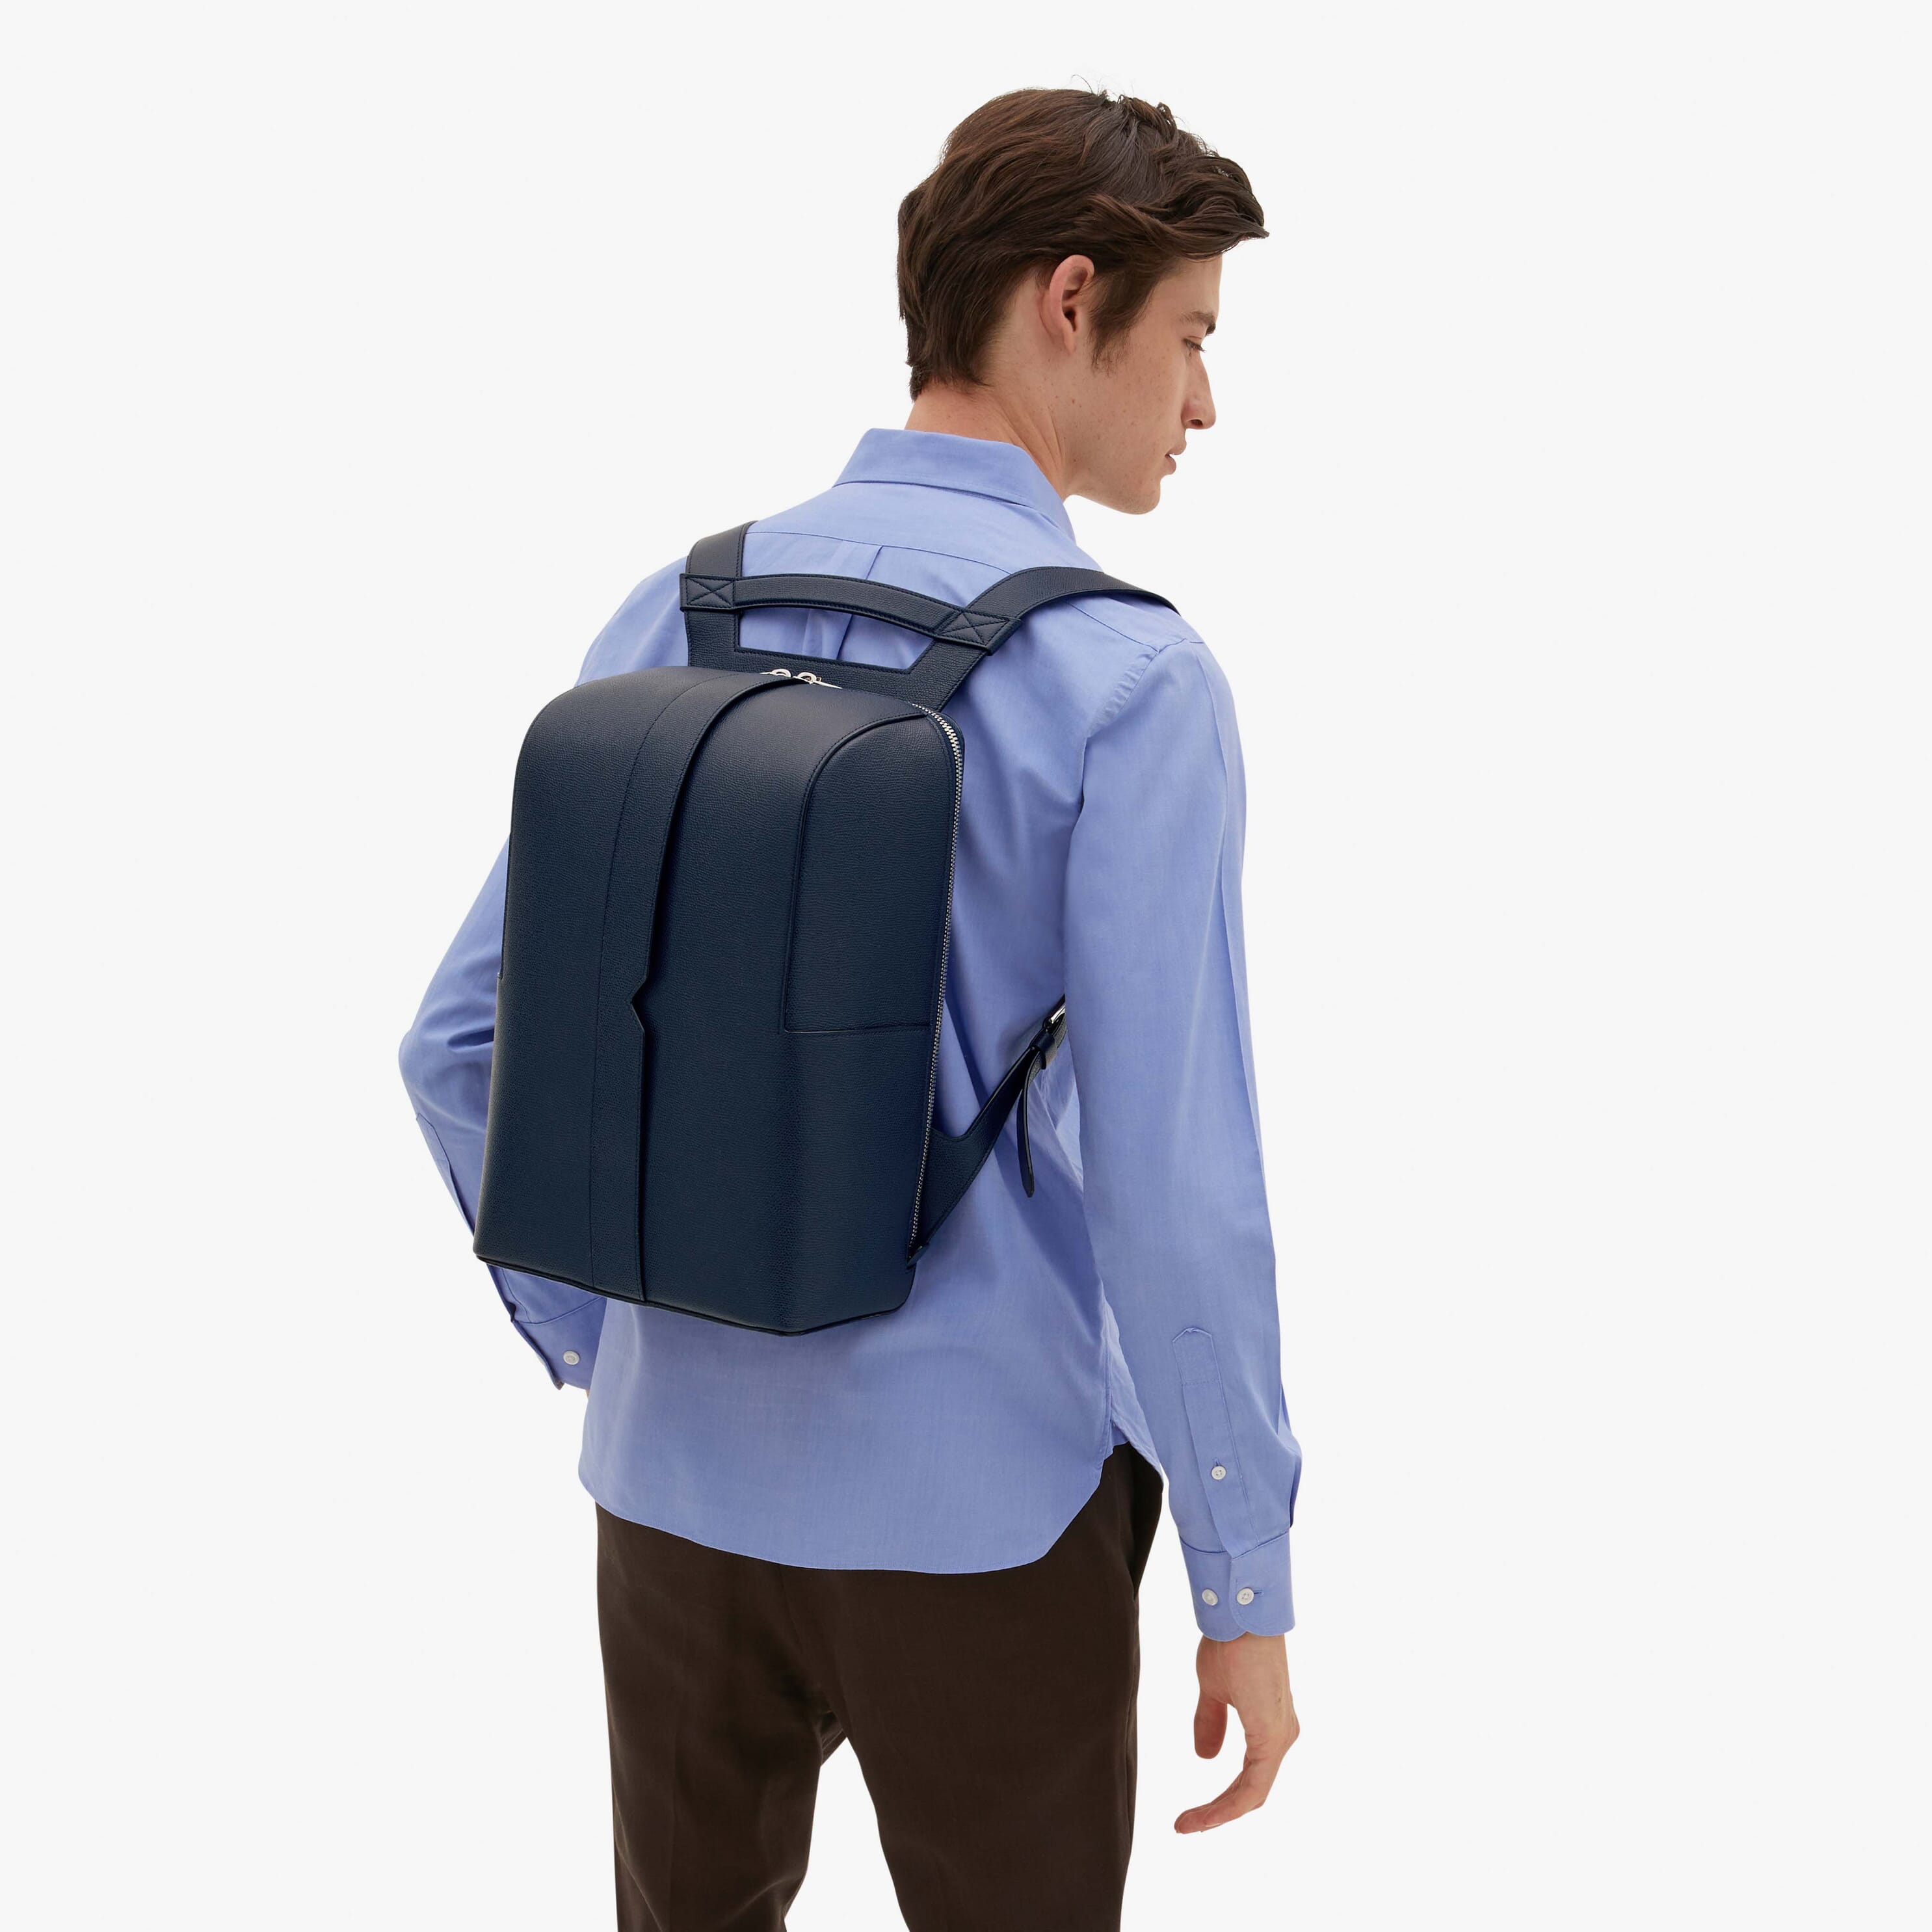 BIG TWO SHOULDER STRAPS BACKPACK V-LINE TRIC TRAC CALF LEATHER VS PALLADIUM,BB,gallery